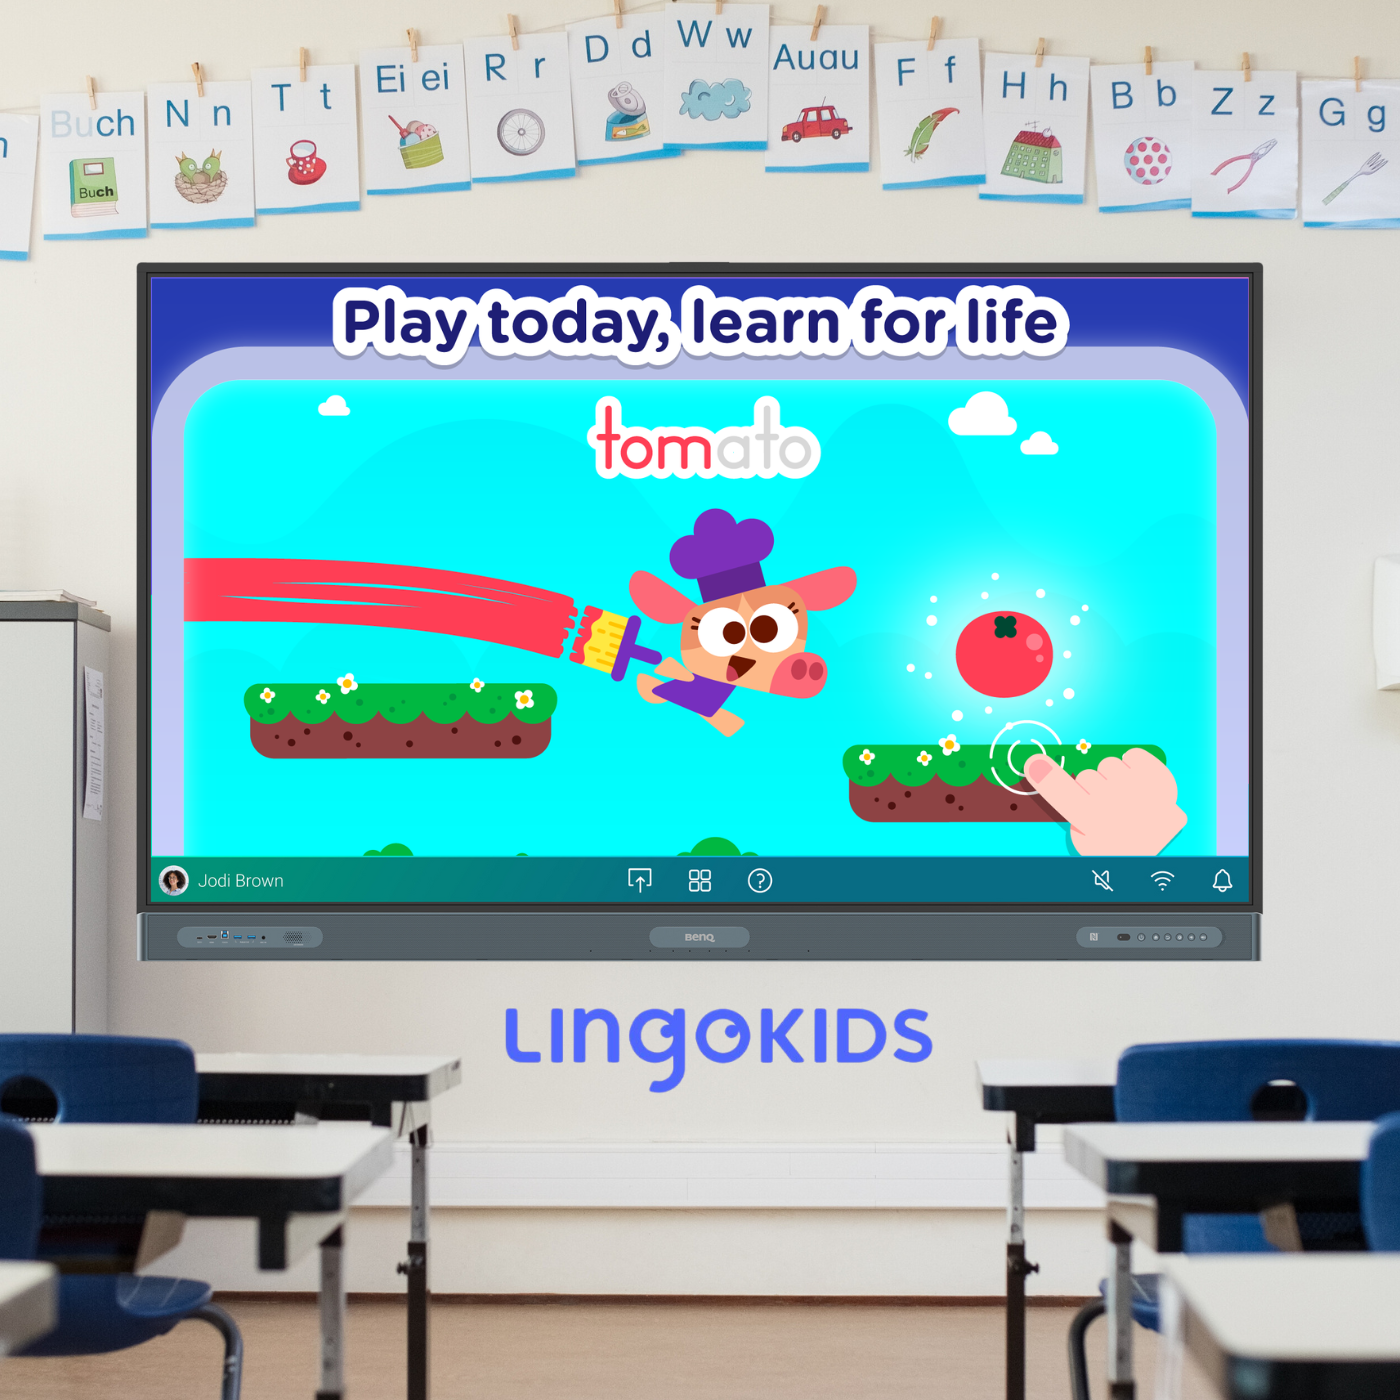 Wixie_Press Release_Picture - LingoKids press release_main artical picture